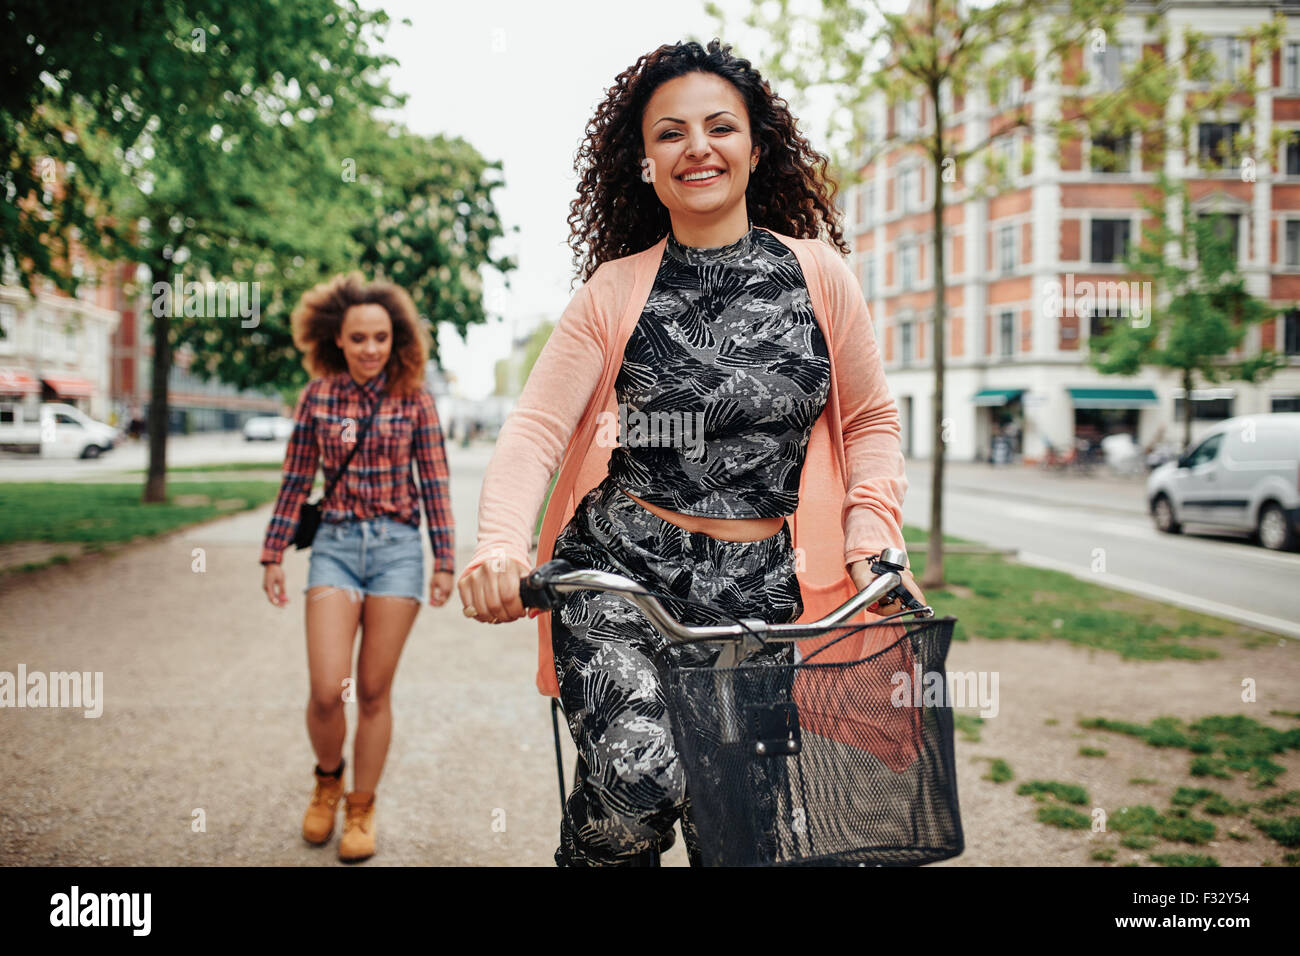 Portrait of happy young woman riding bicycle with another walking in background on city street. Stock Photo